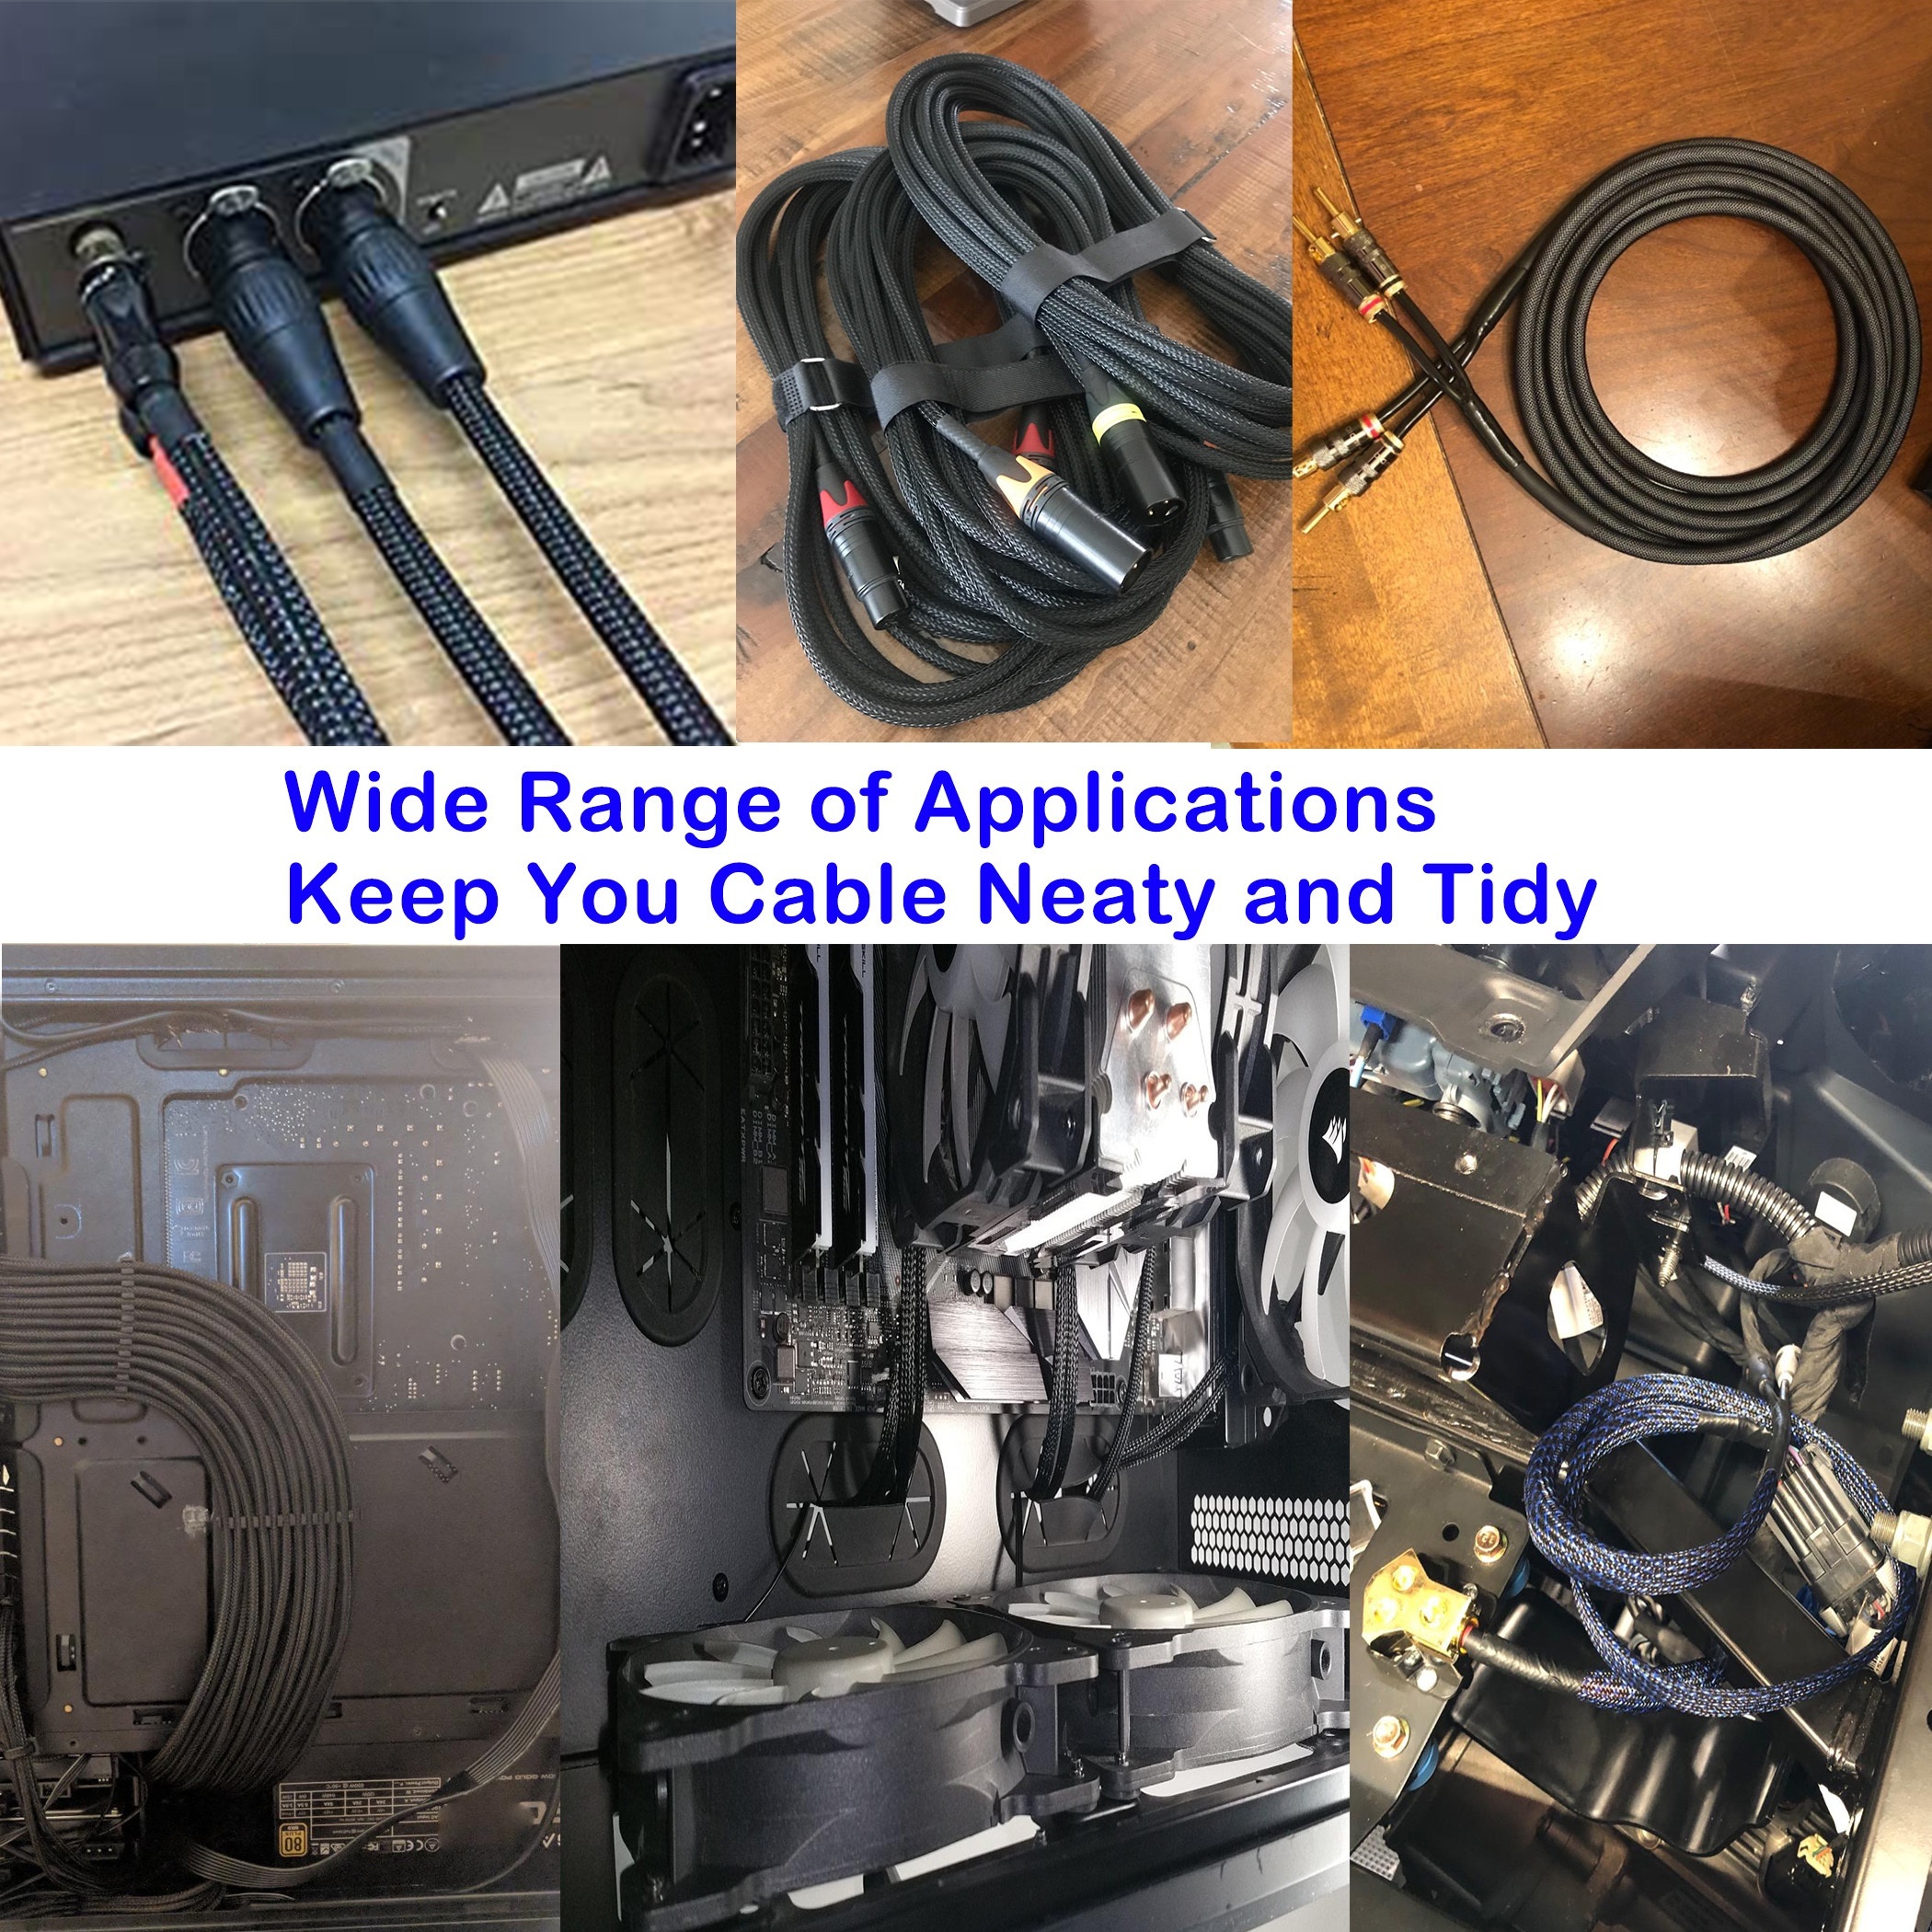 Cable Sleeving, Braided Sleeve & Wire Loom Cable Management